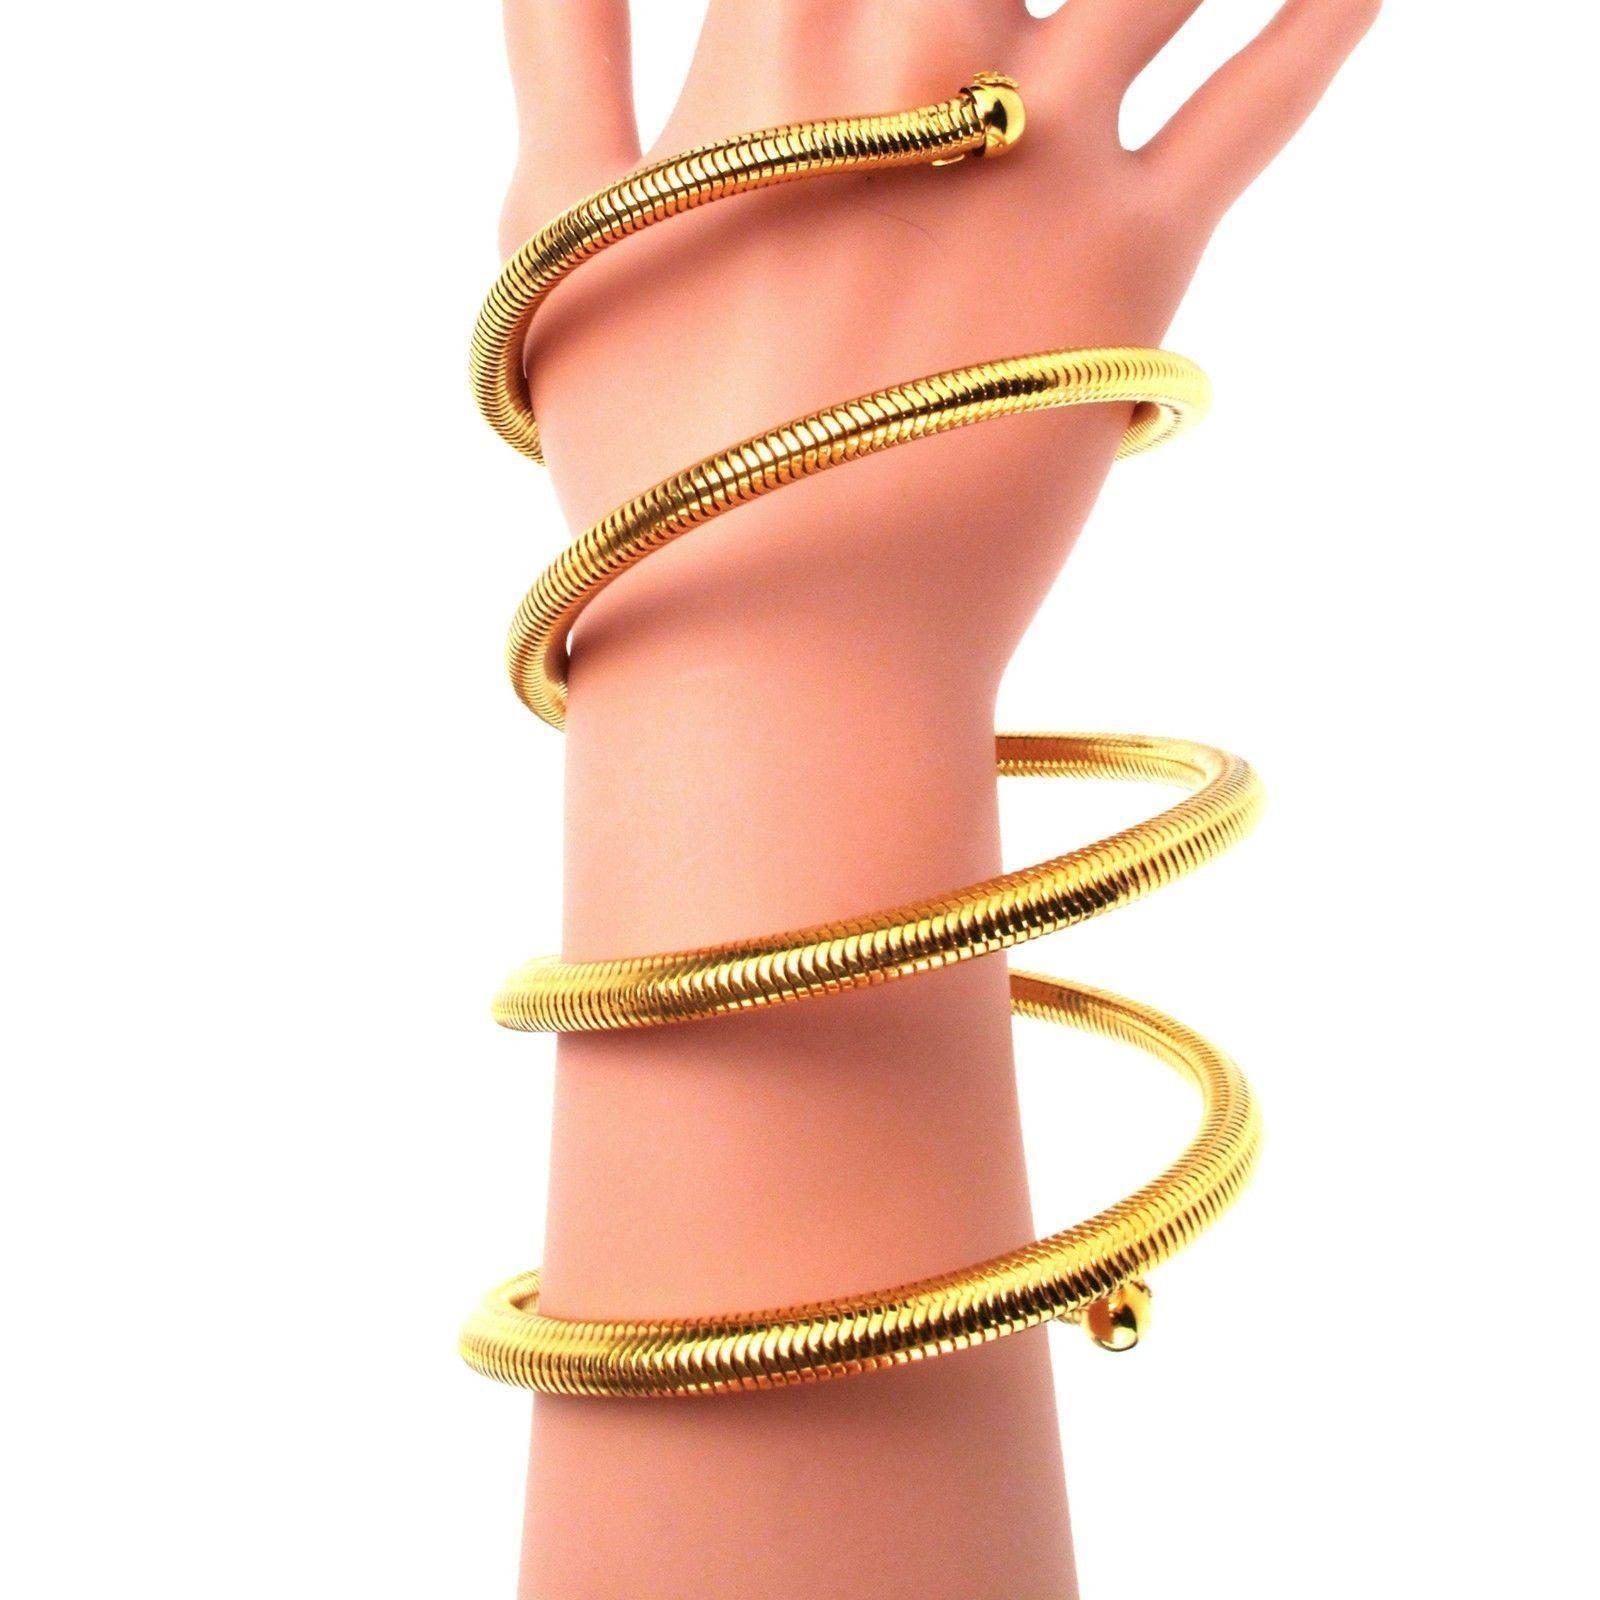 Chanel - Vintage Coil Arm Bracelet

can be worn on the upper arm or lower arm - very versatile!

Color: Gold

------------------------------------------------------------
 
Details:

- gold tone metal 

- CC logos at both ends

-